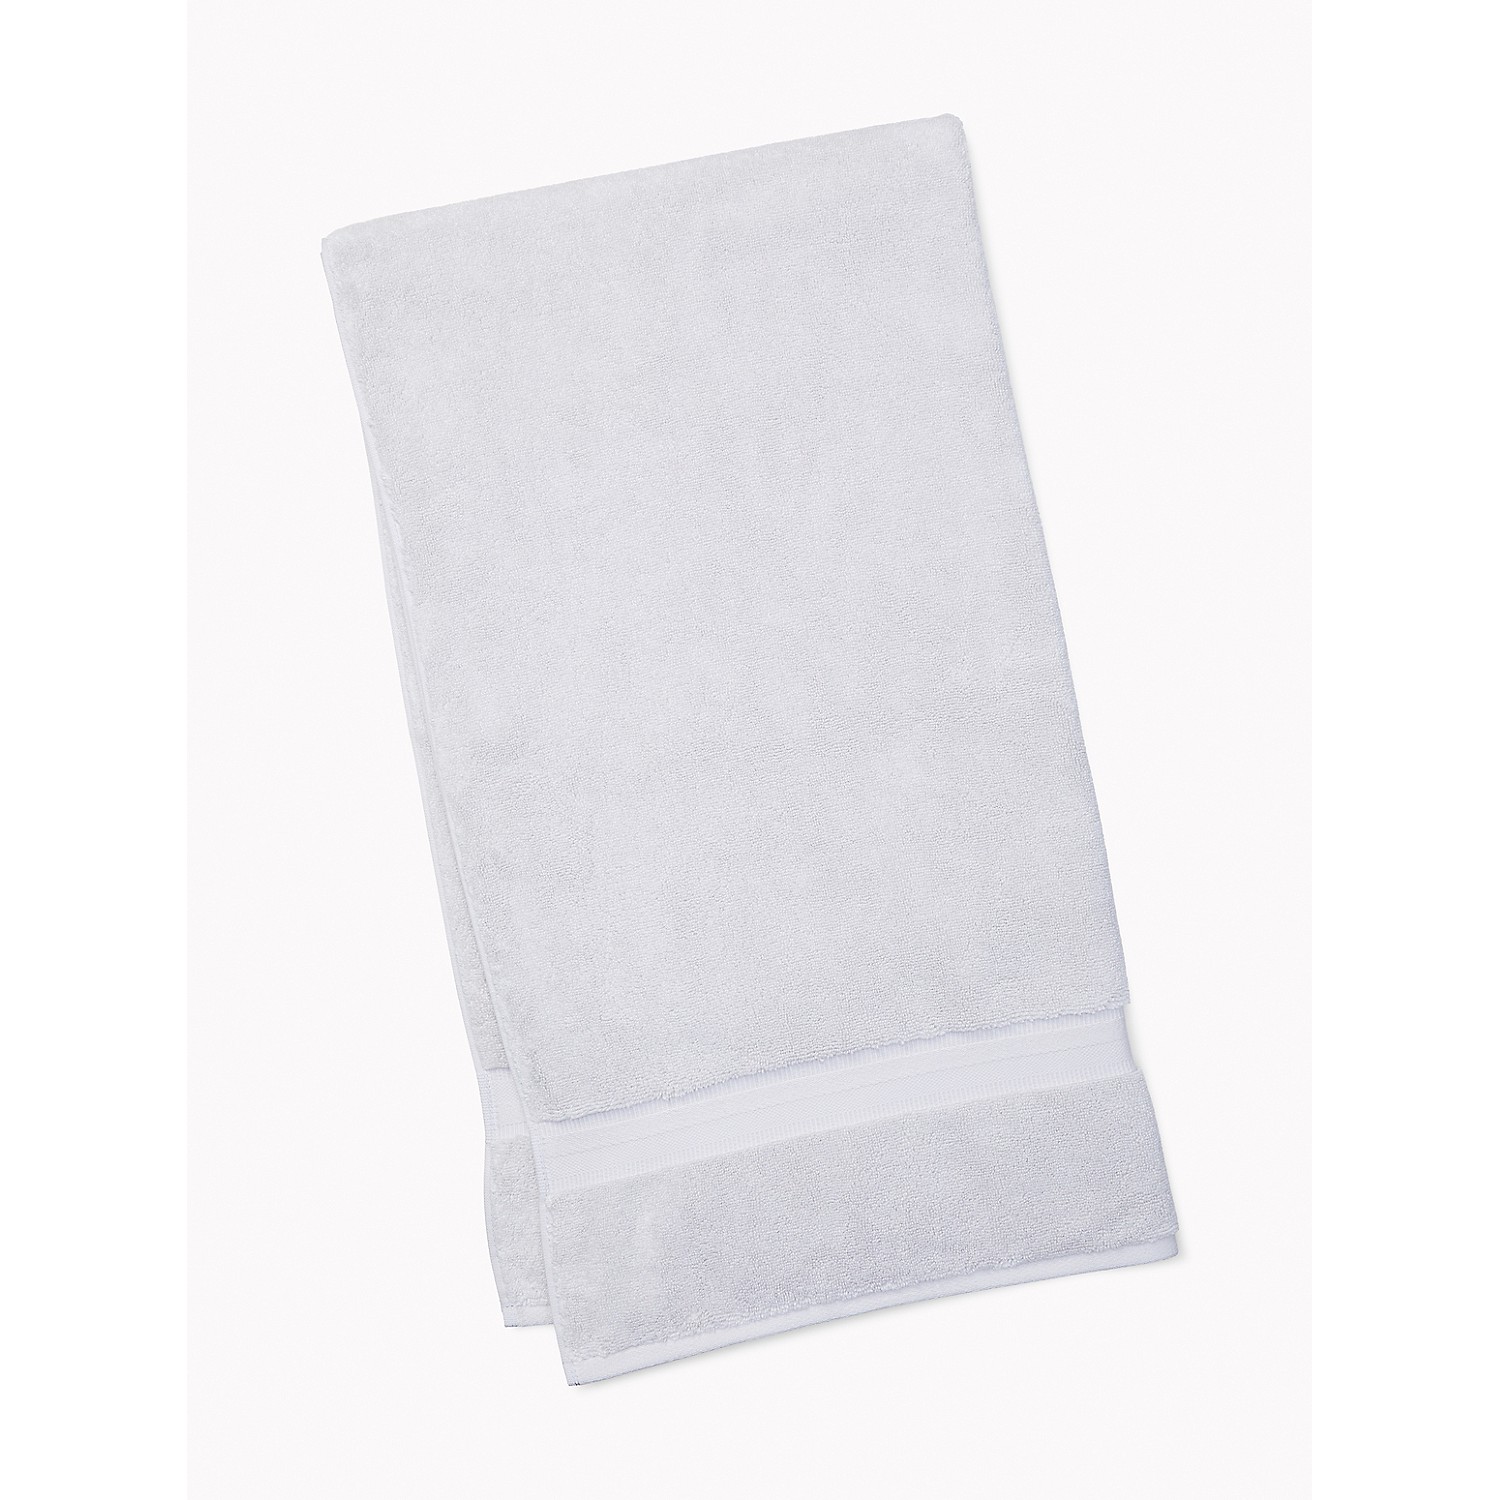 TOMMY HILFIGER Signature Solid Bath Towel in Light Gray